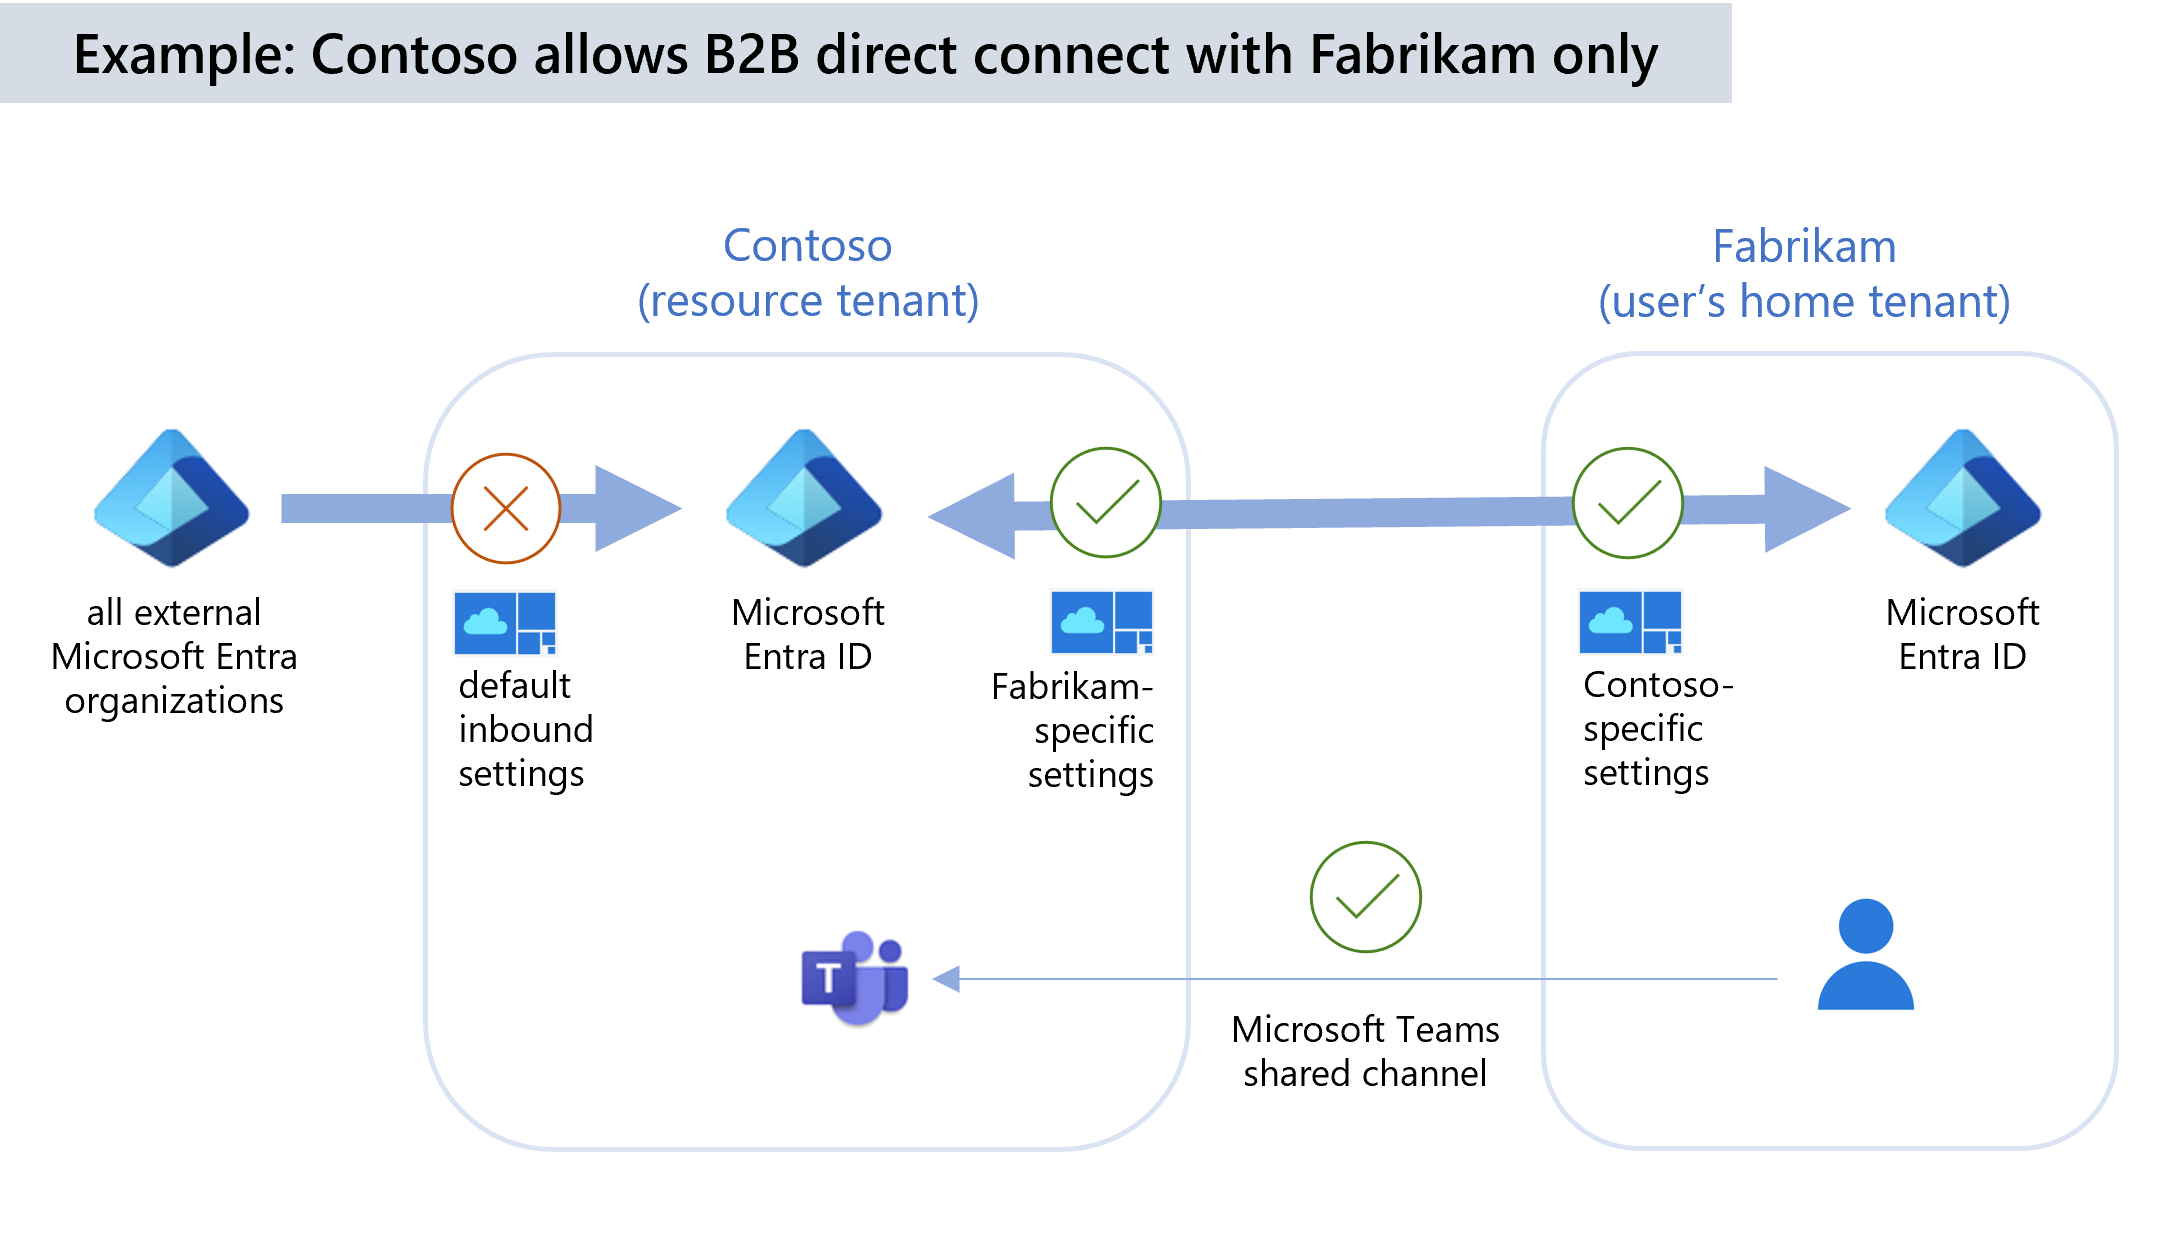 Example of blocking B2B direct connect by default but allowing an org.